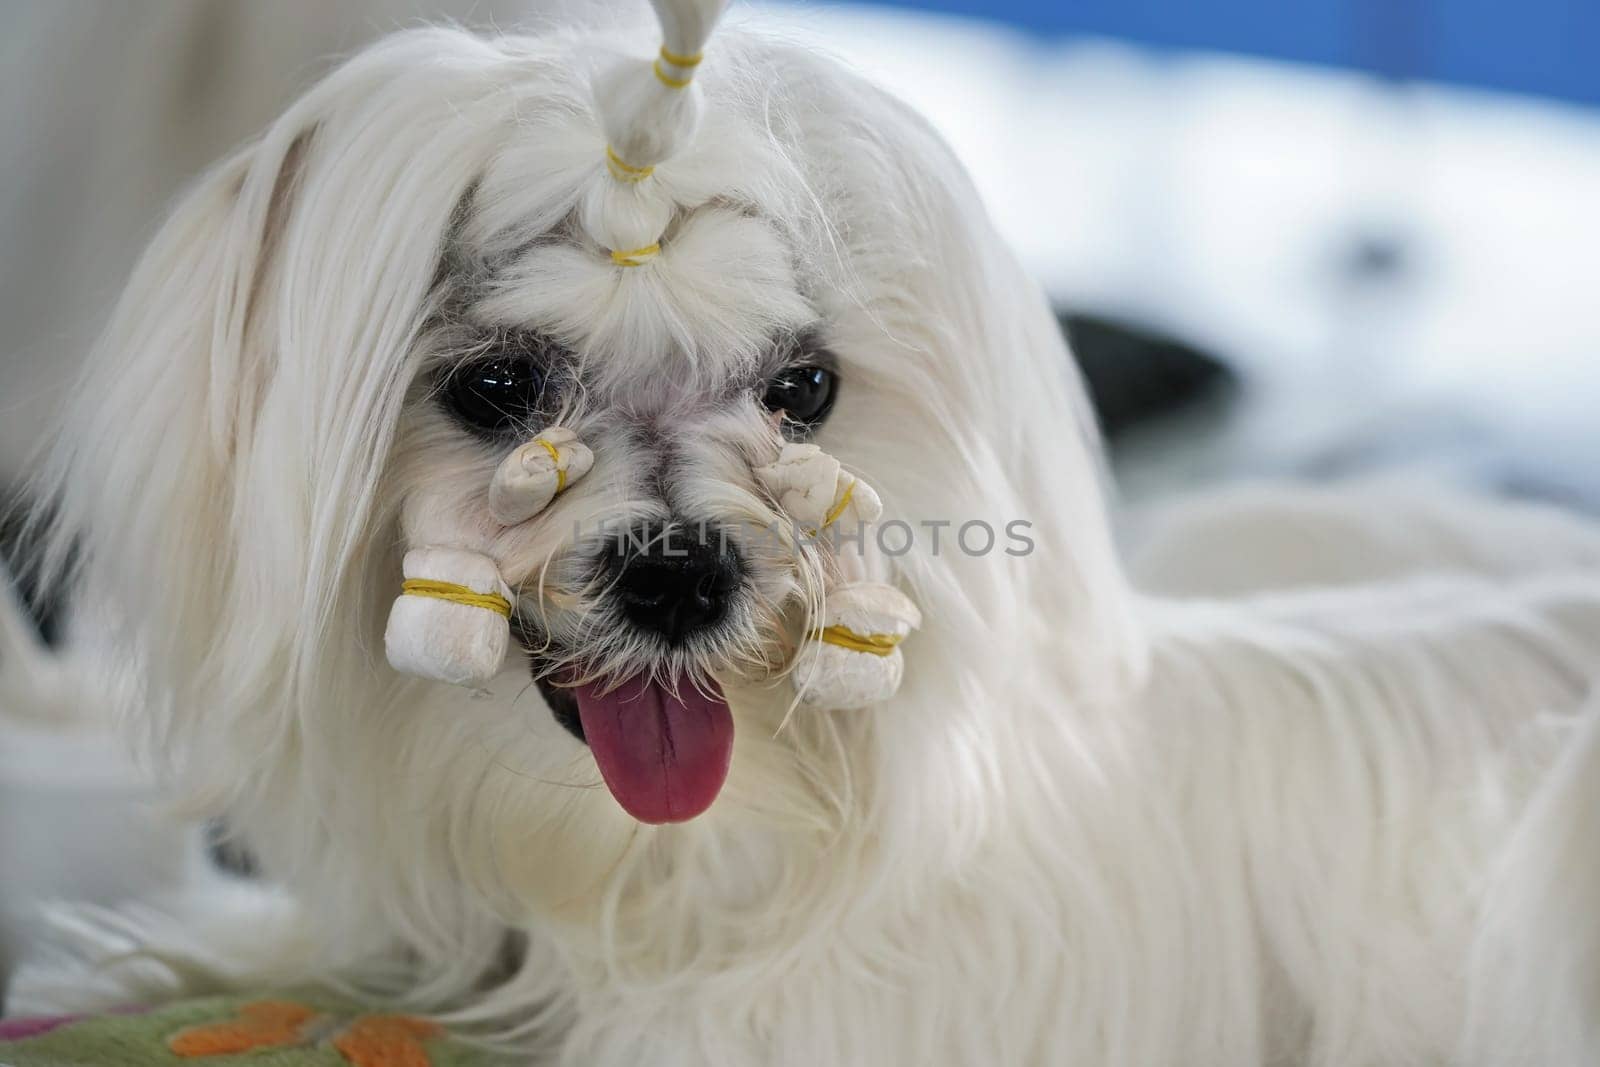 White Shihtzu dog getting groomed at canine contest, hair on face holding together with rubber bands